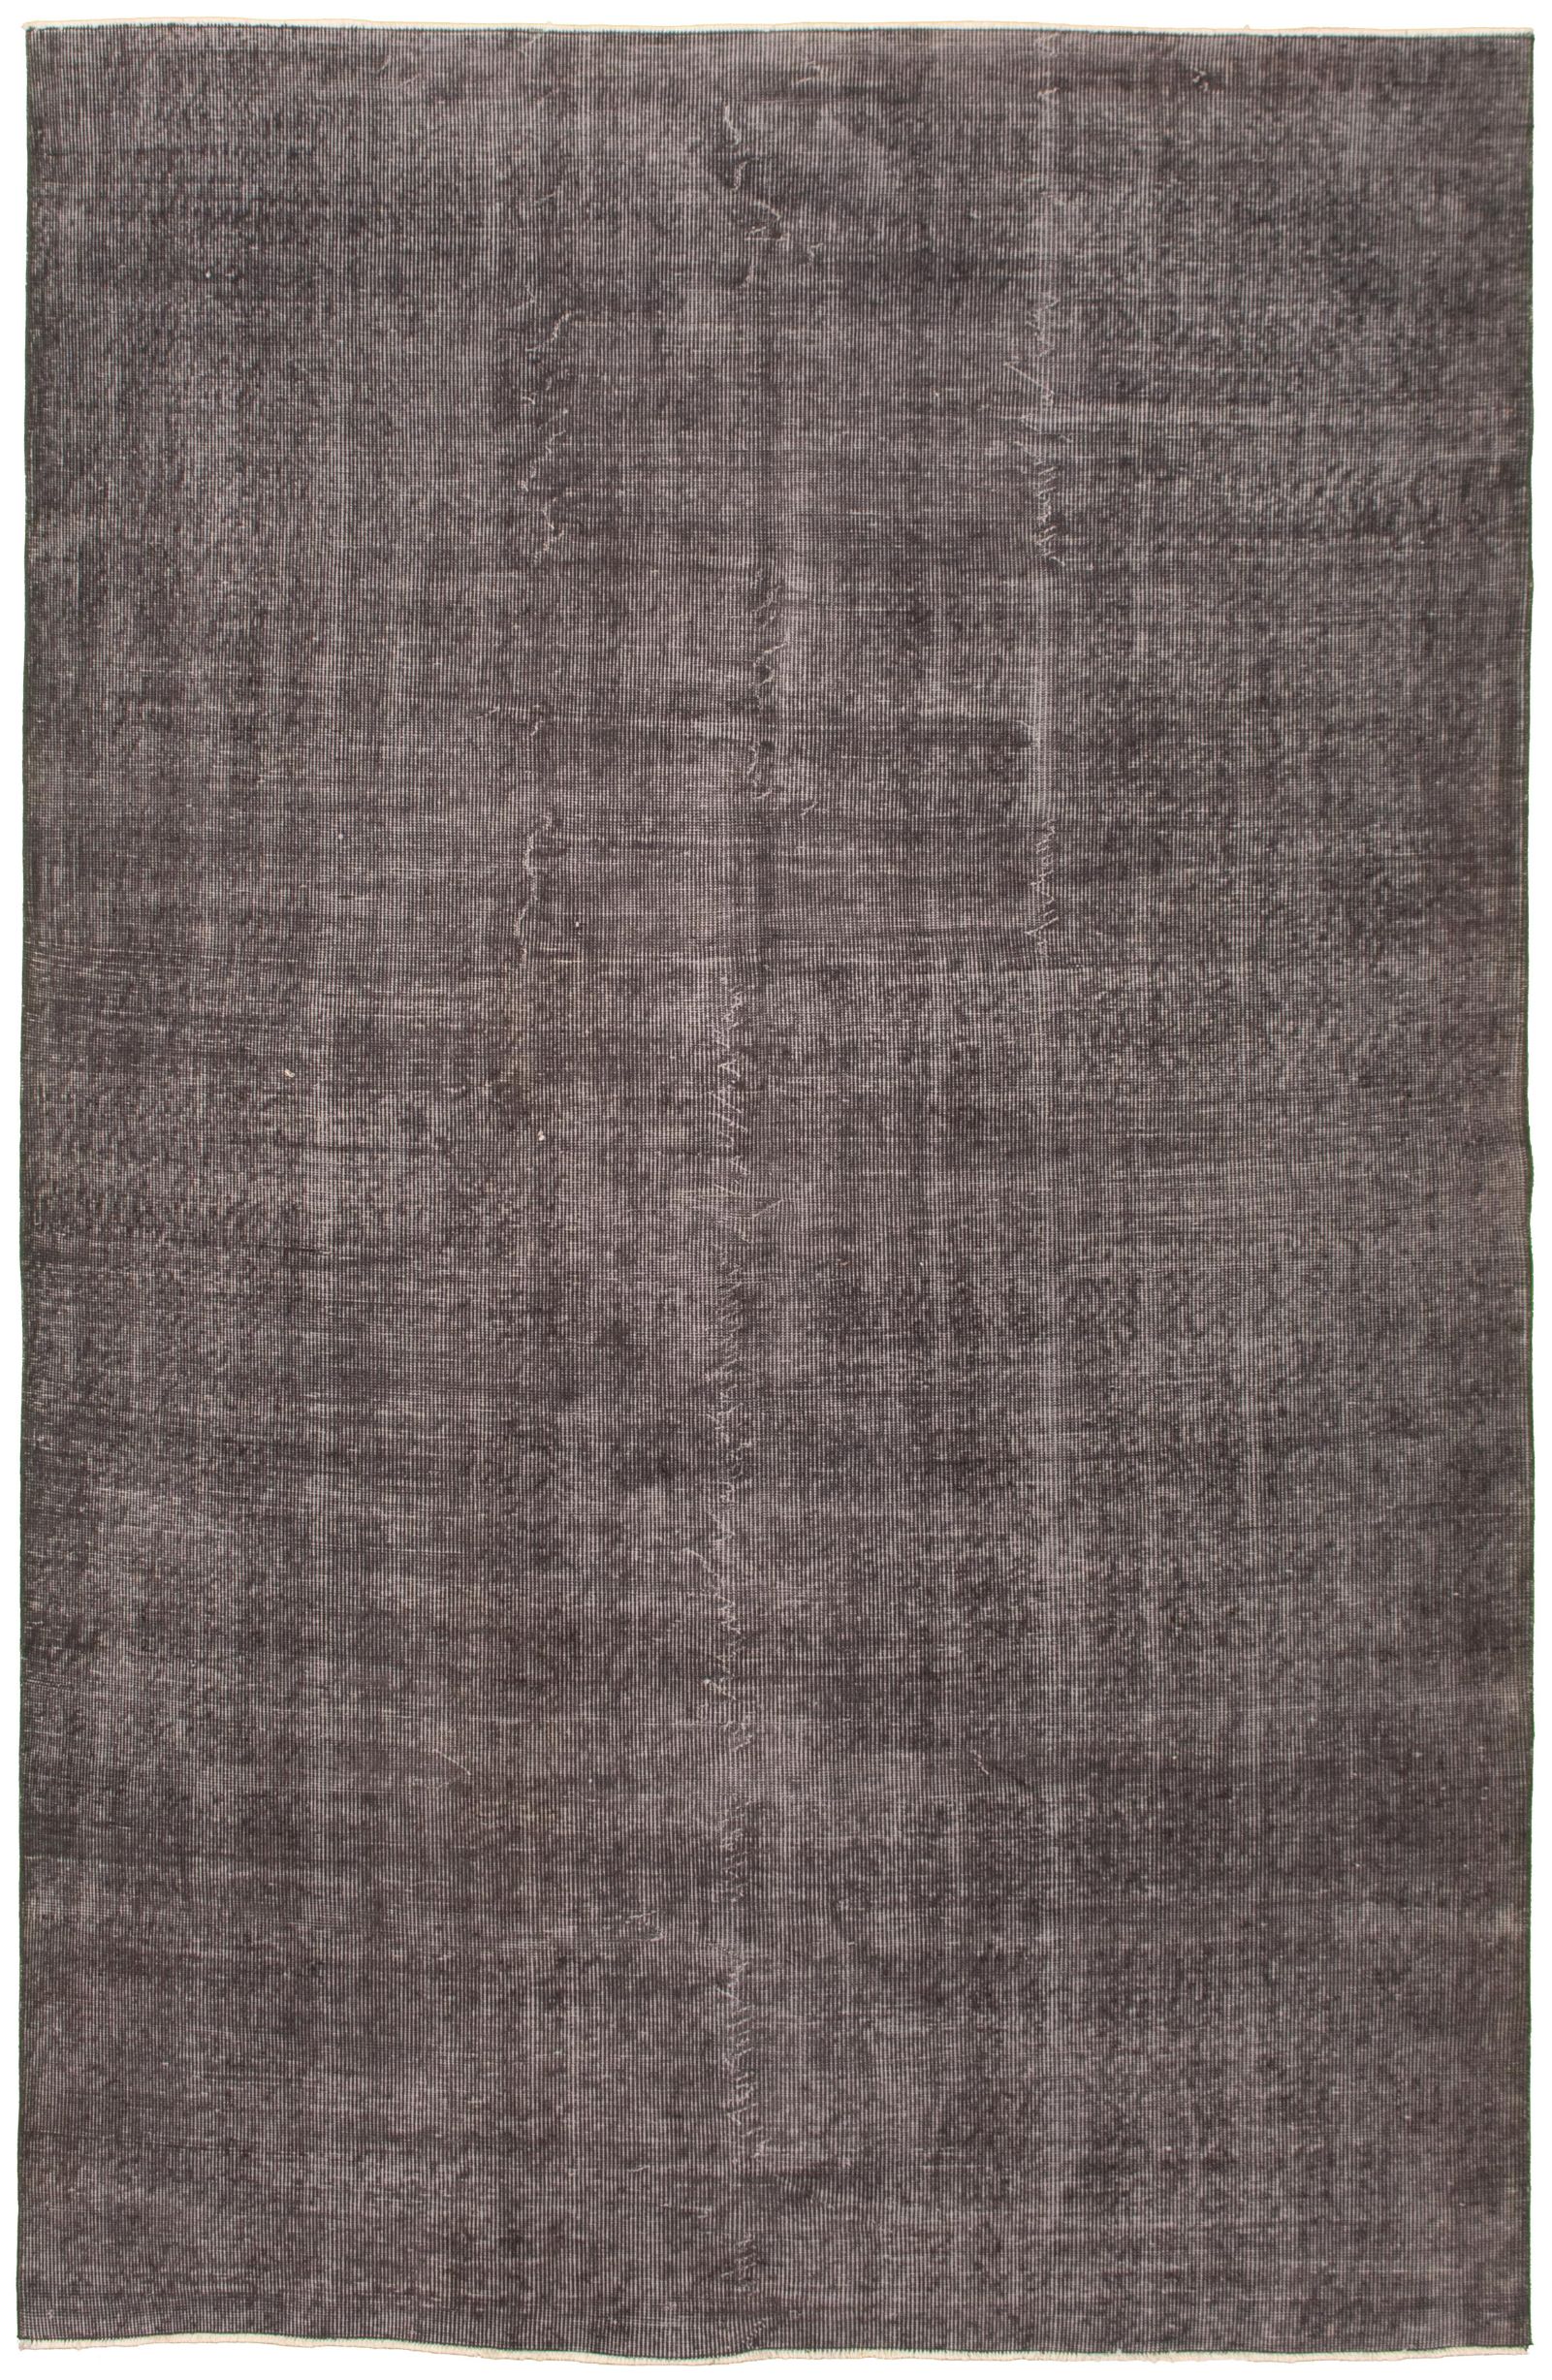 Hand-knotted Color Transition Dark Grey Wool Rug 6'1" x 9'10" Size: 6'1" x 9'10"  